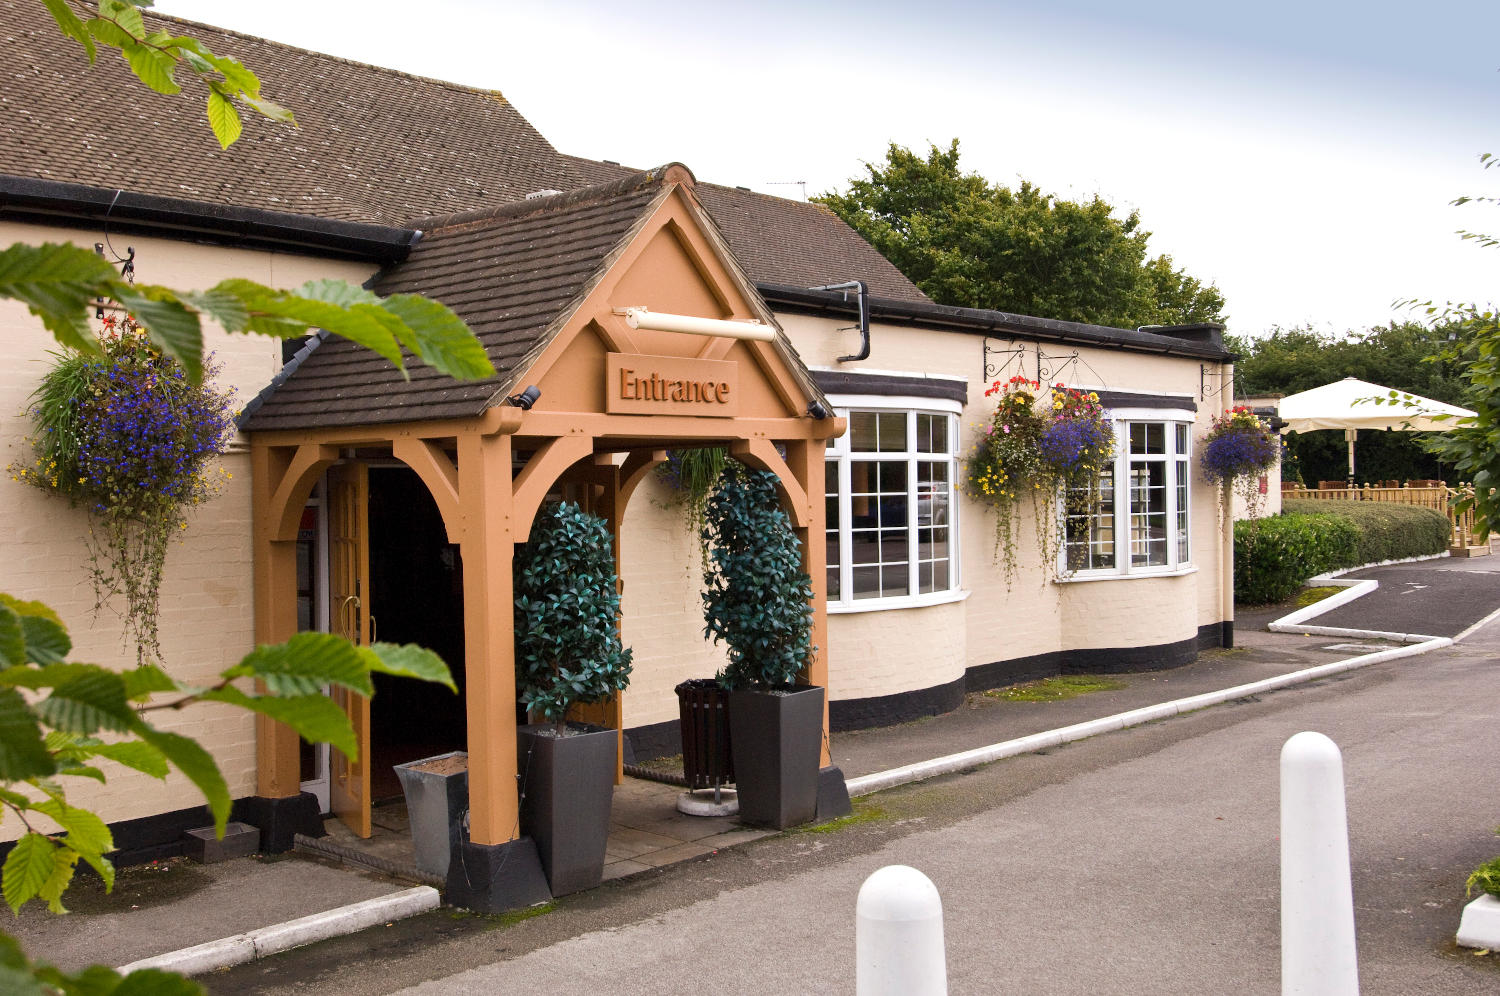 Beefeater restaurant exterior Premier Inn Solihull South (M42) hotel Solihull 08715 278986